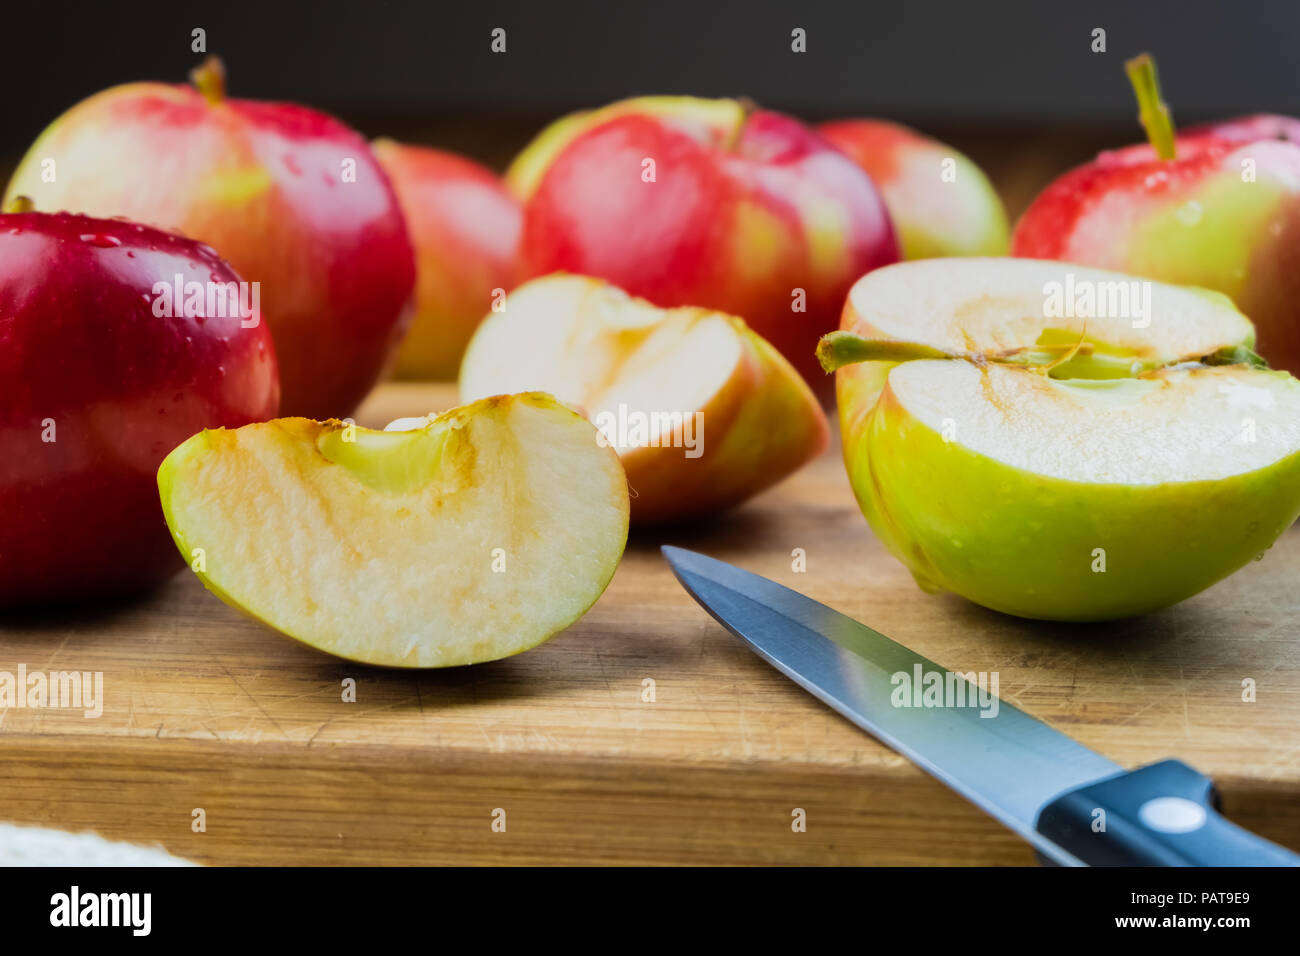 Close-up of ripe juicy apples on wooden table. Home grown organic apples and knife on rustic table background Stock Photo